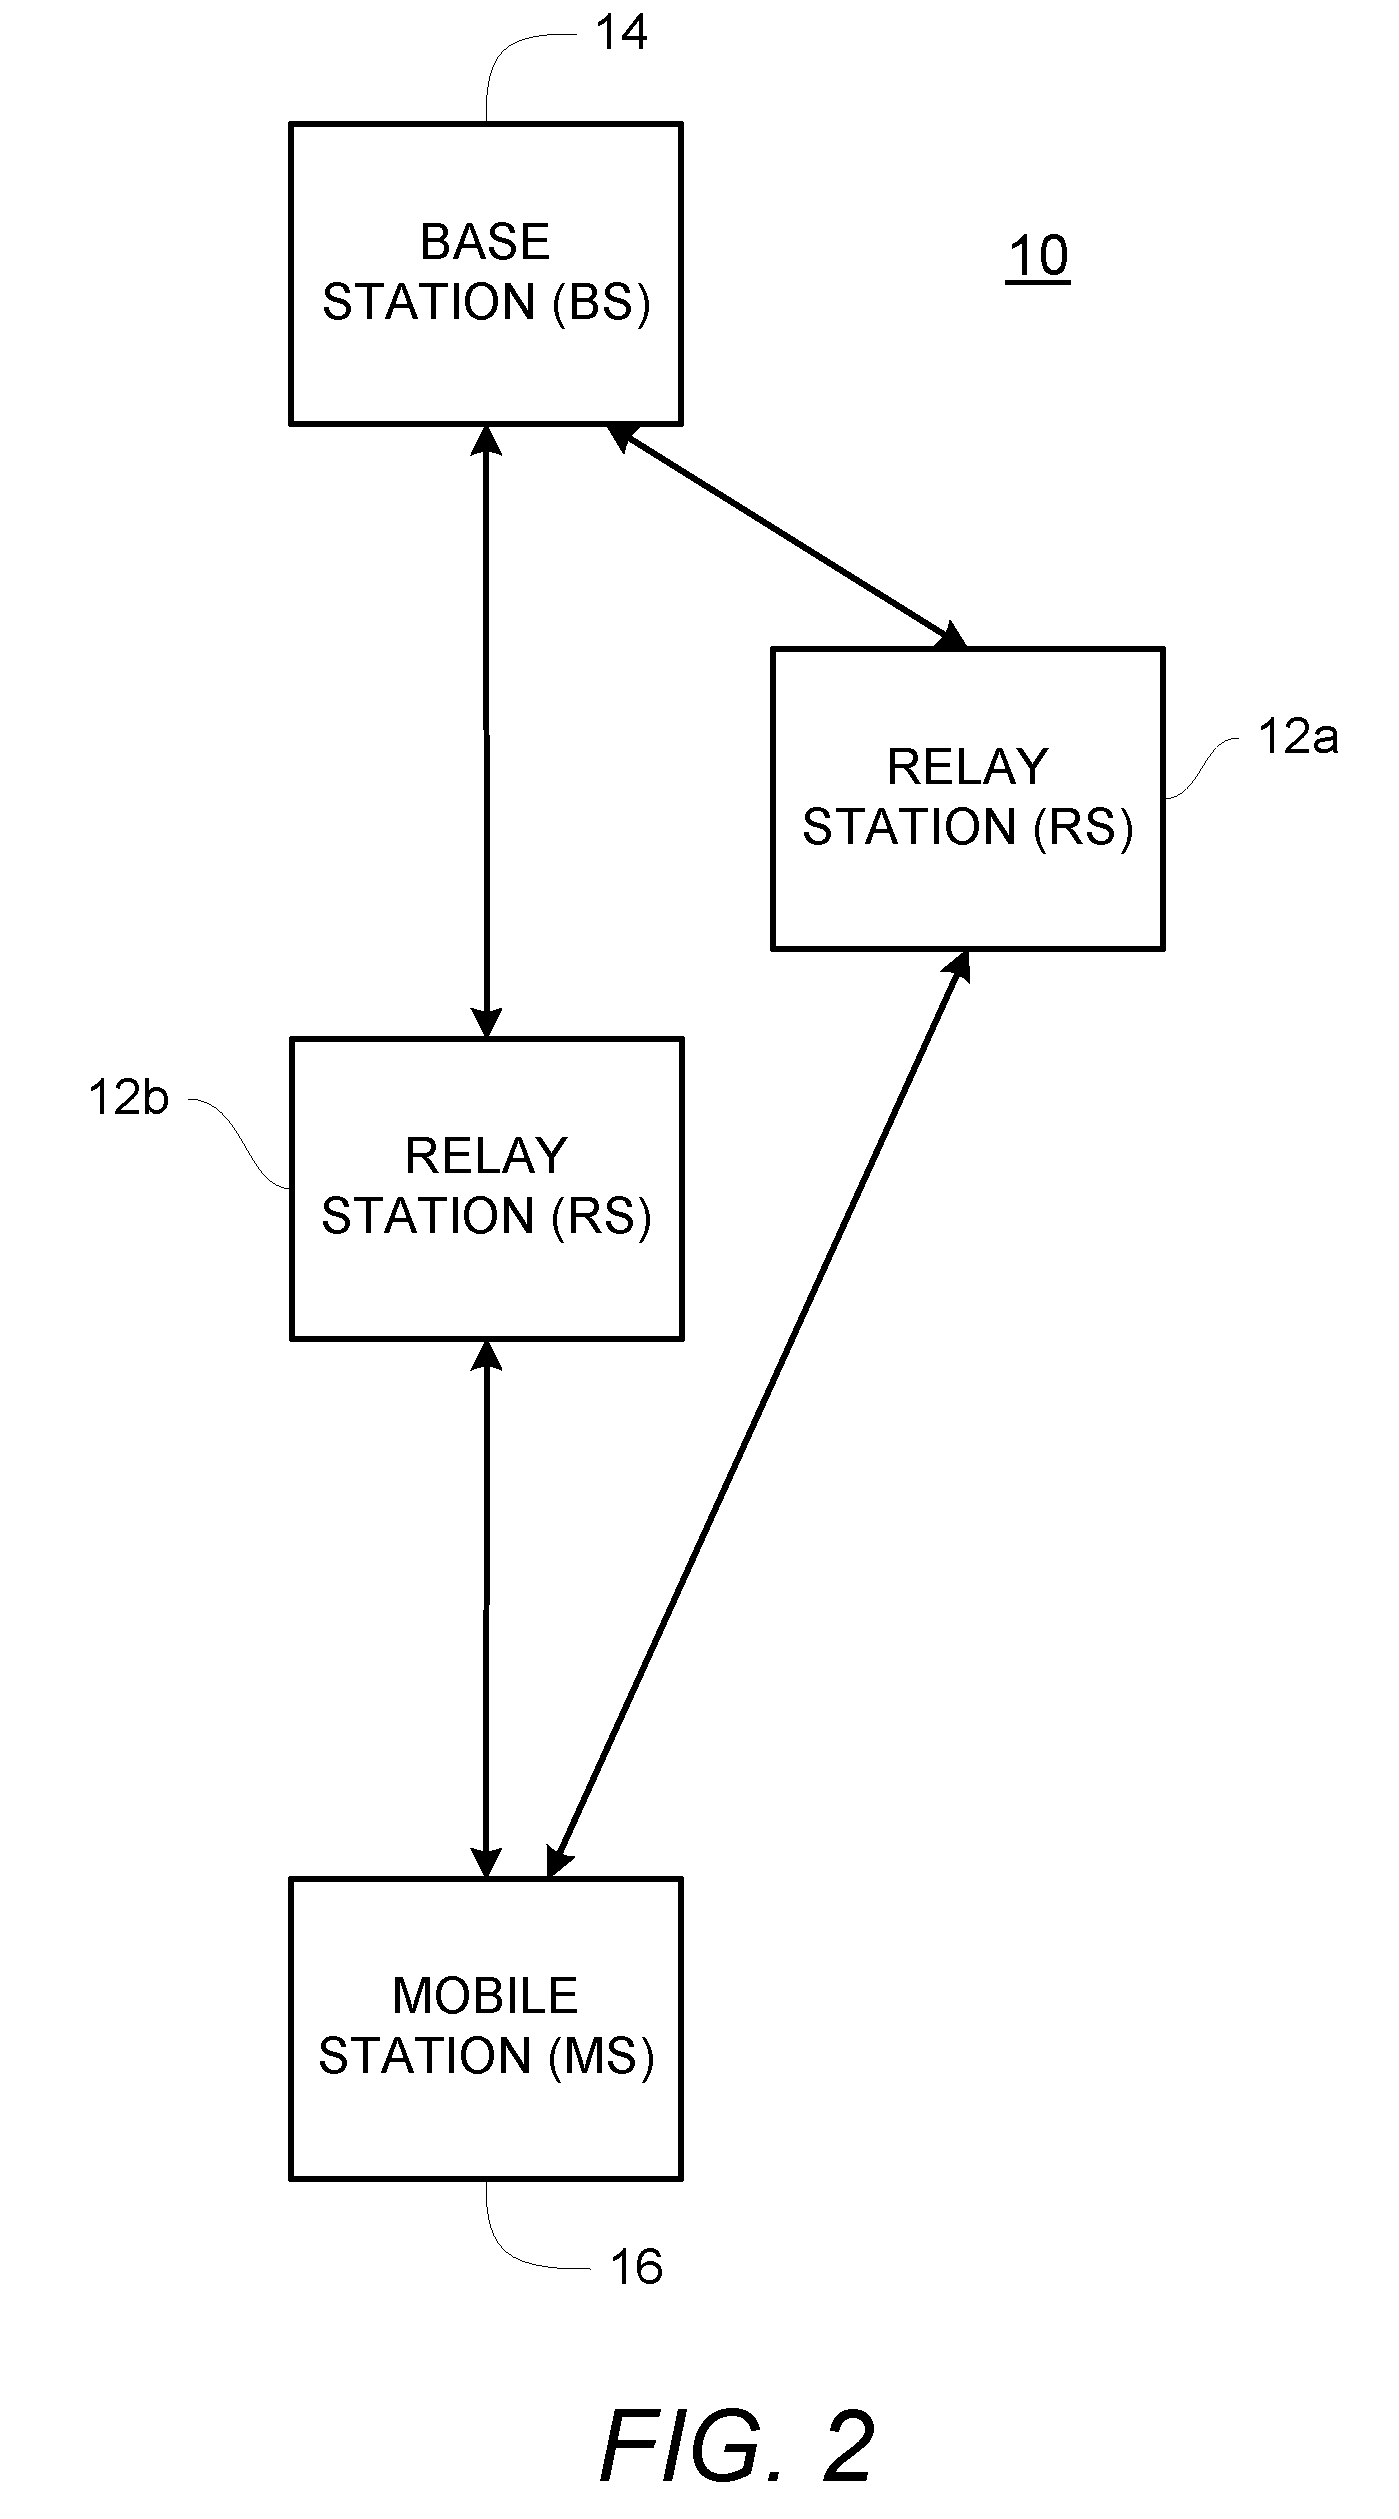 Path selection for a wireless system with relays